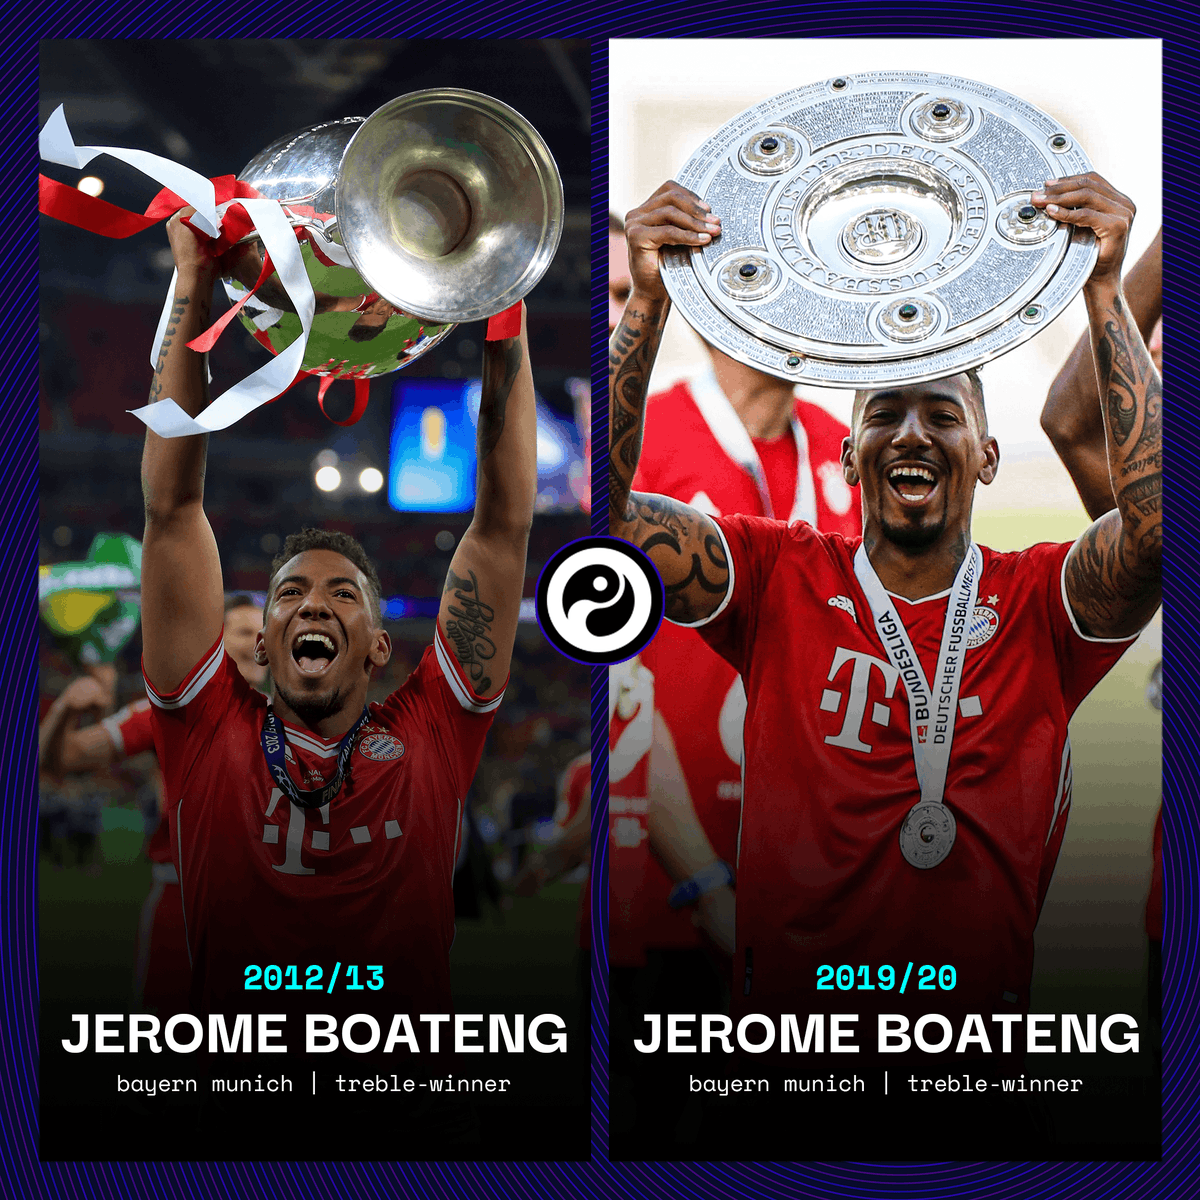 2012/13: Jerome Boateng wins the treble with Bayern Munich2019/20: Jerome Boateng wins the treble with Bayern MunichHis trophy collection keeps on growing.